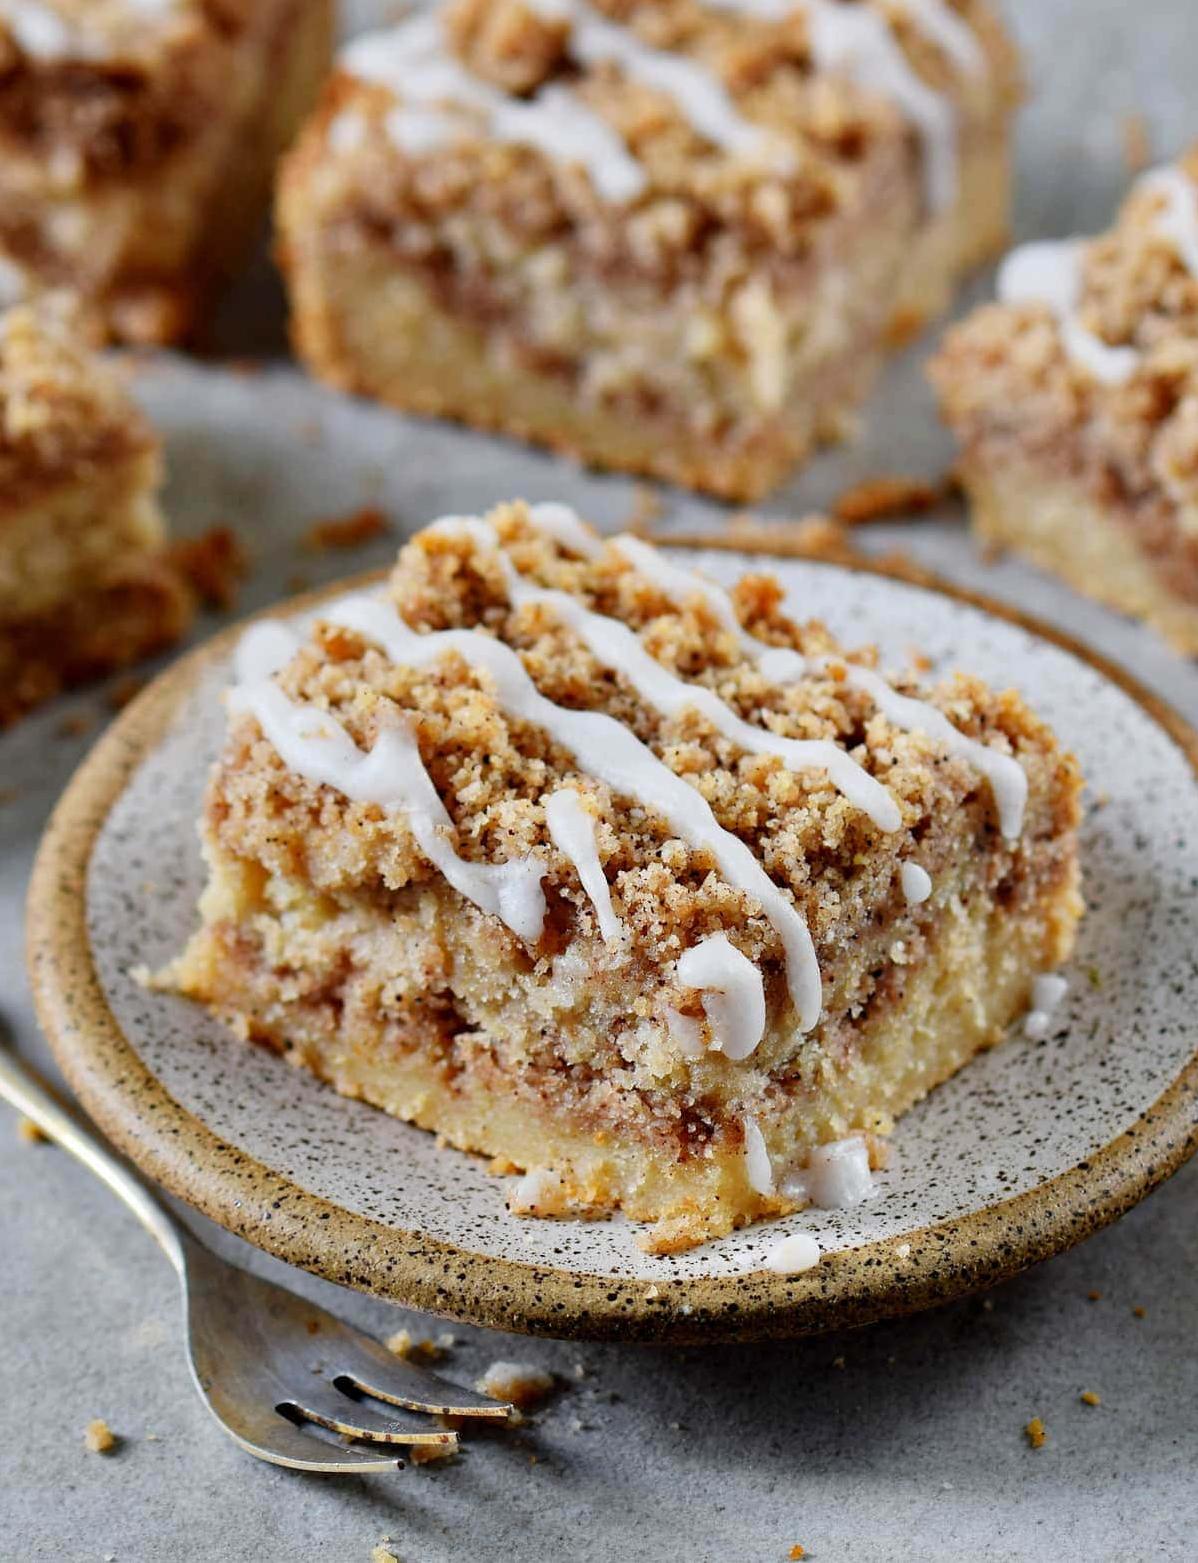  Moist, tender cake with a crunchy, sweet cinnamon topping is a match made in heaven.